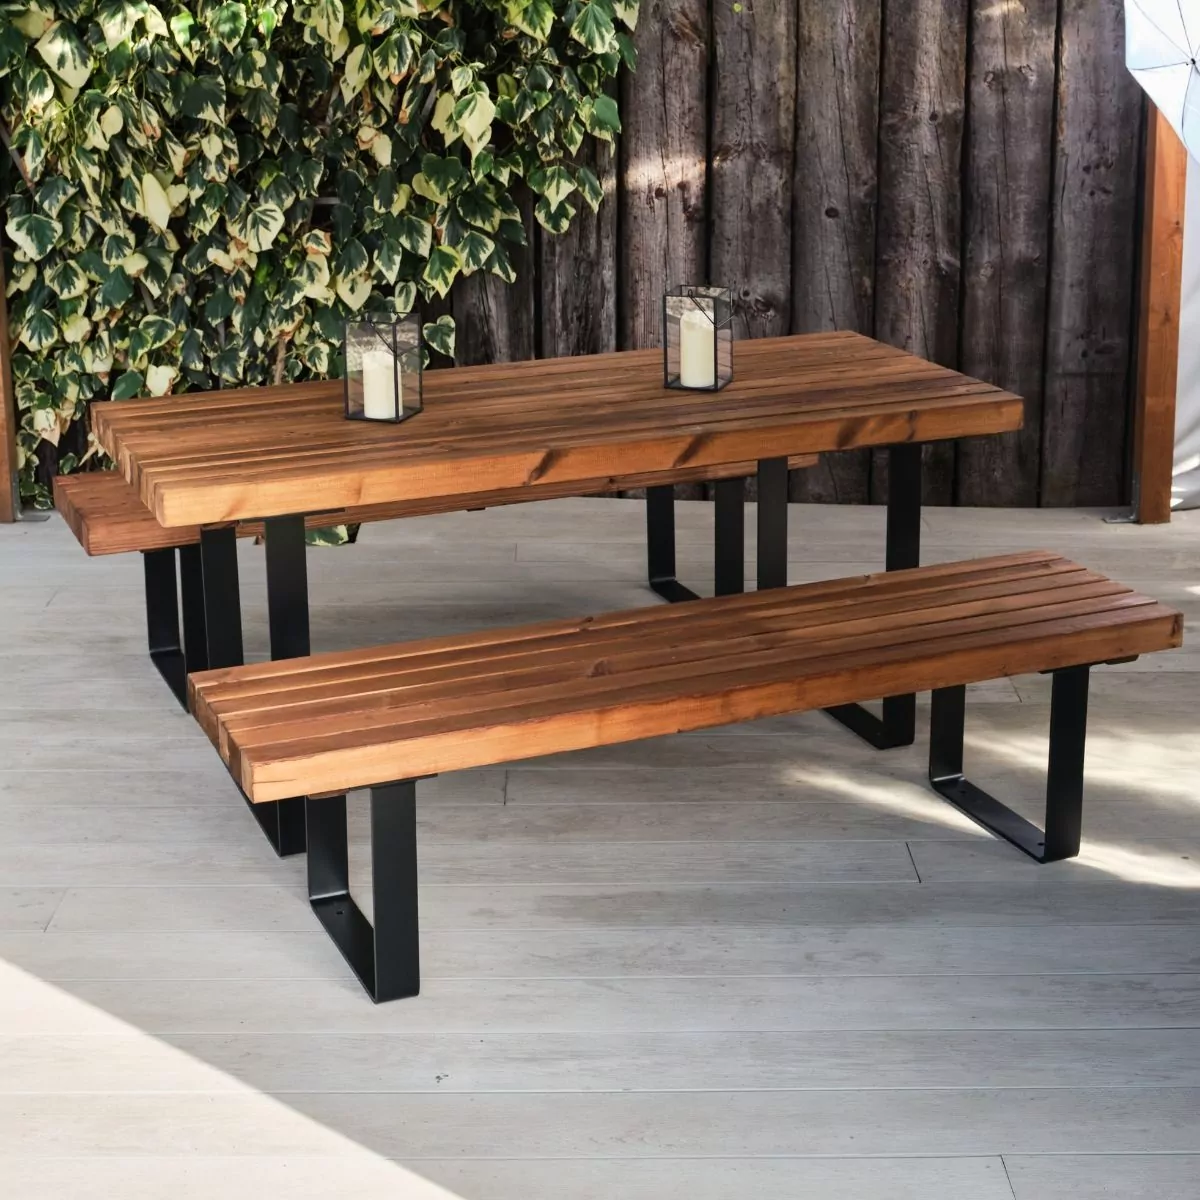 rectangular-wood-and-metal-industrial-outdoor-commercial-table-and-backless-bench-set.jpg